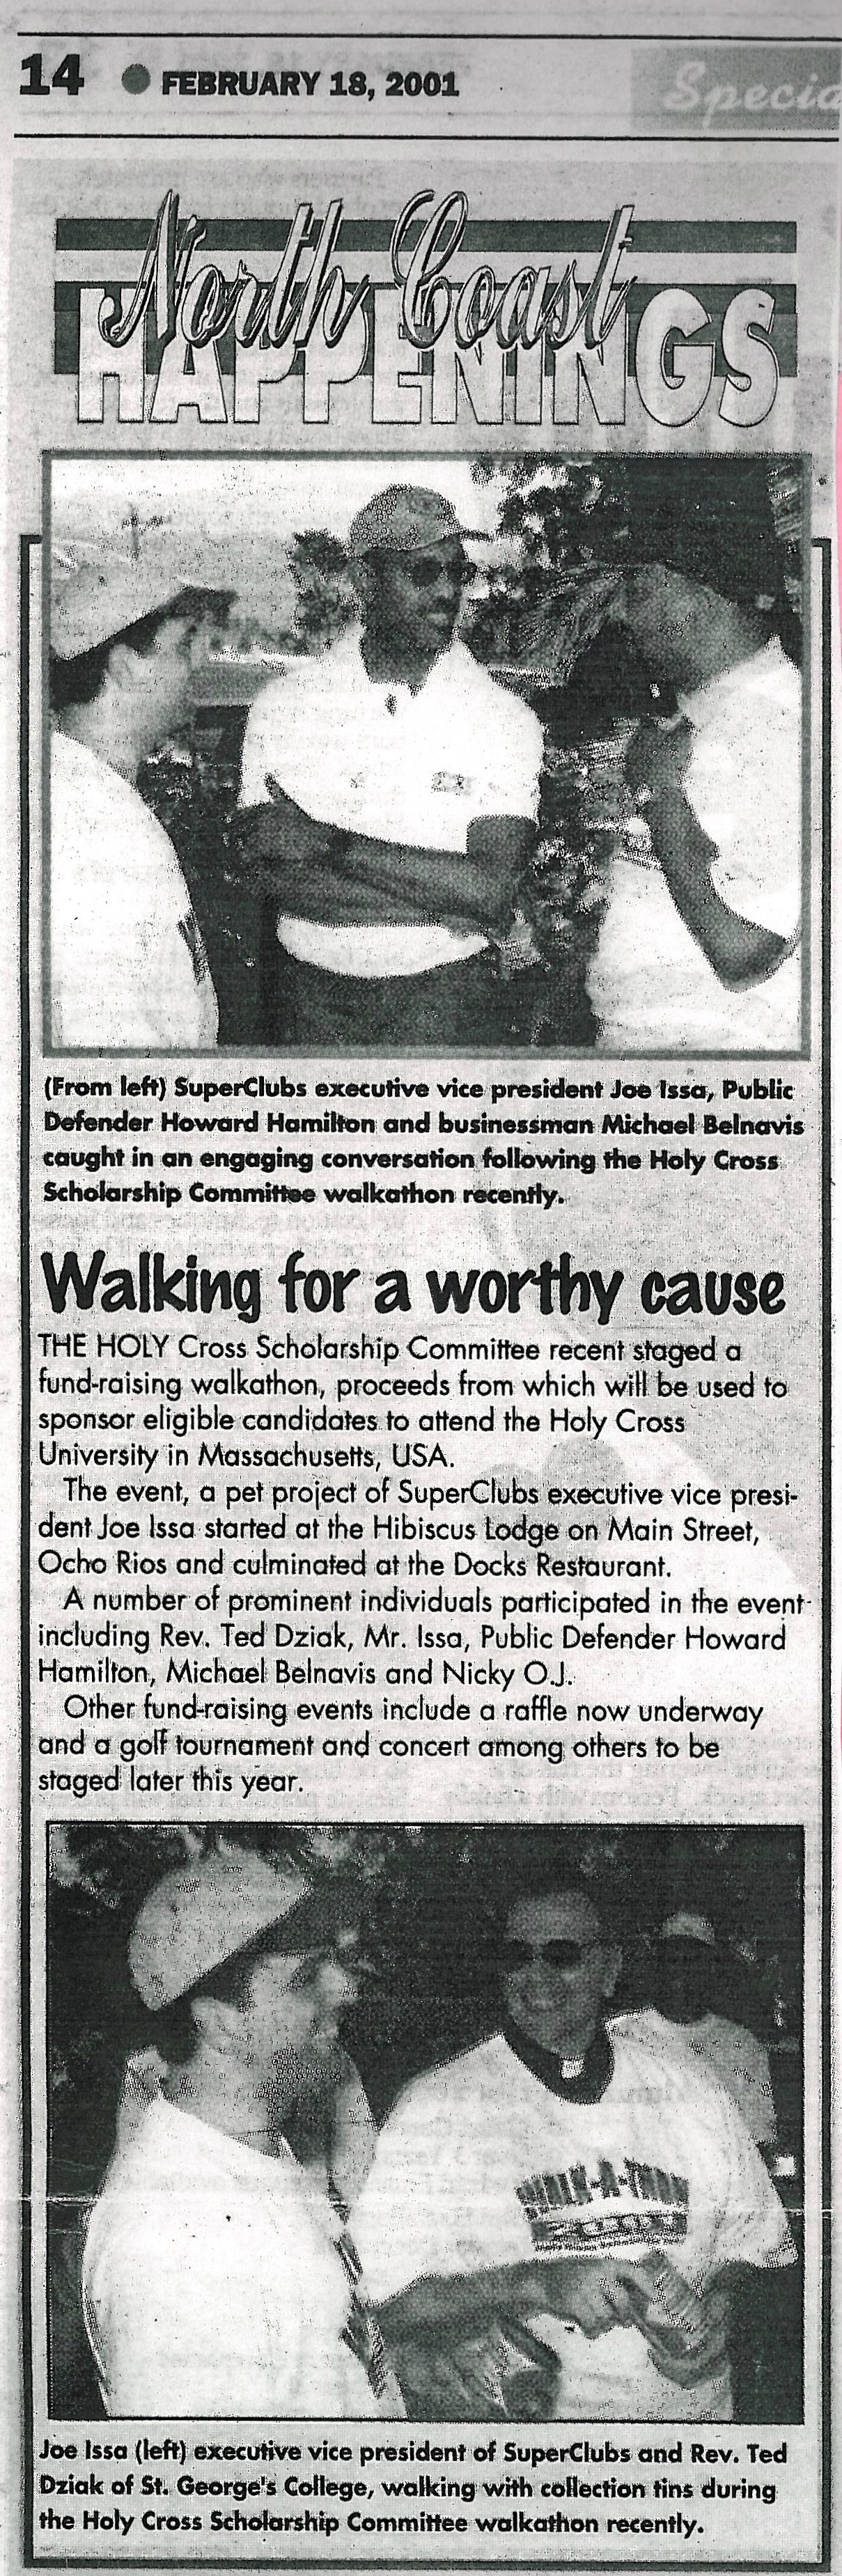 Walking for a worthy cause